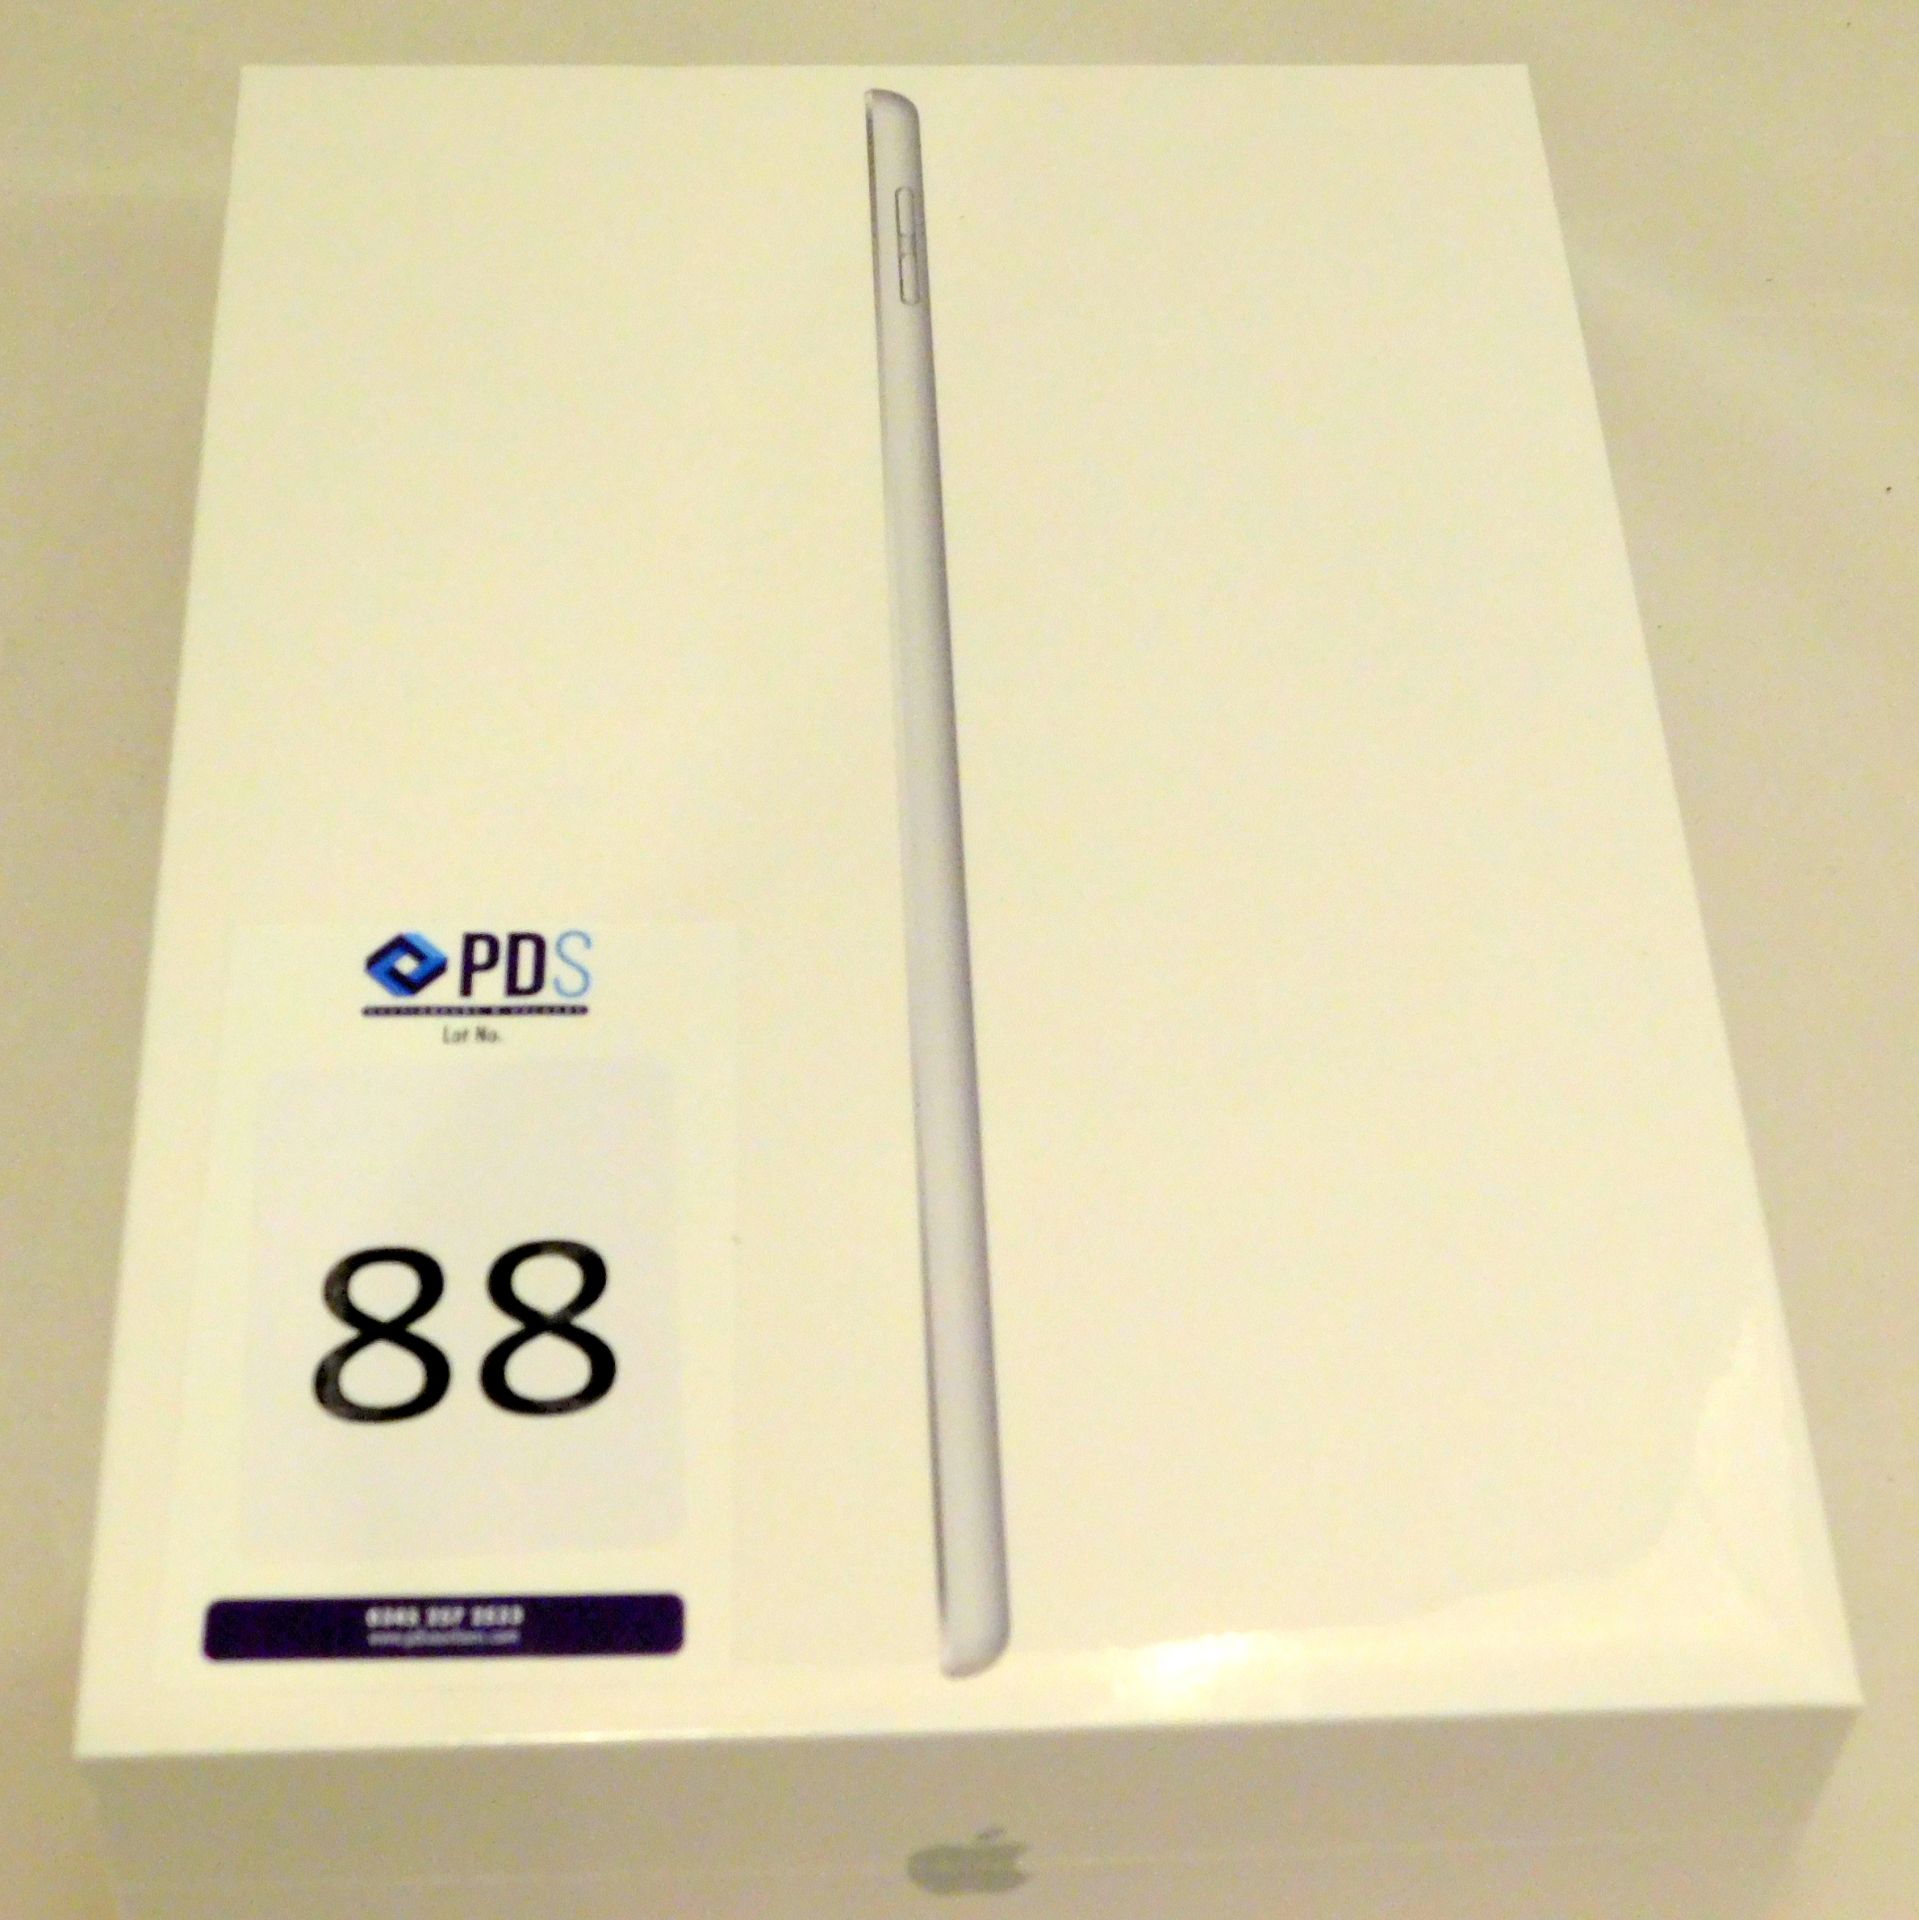 Apple A2197 iPad, 7th Gen, 32GB, Silver, Serial Number: DMPC80VCMF3N, (New in Sealed Box) (Located